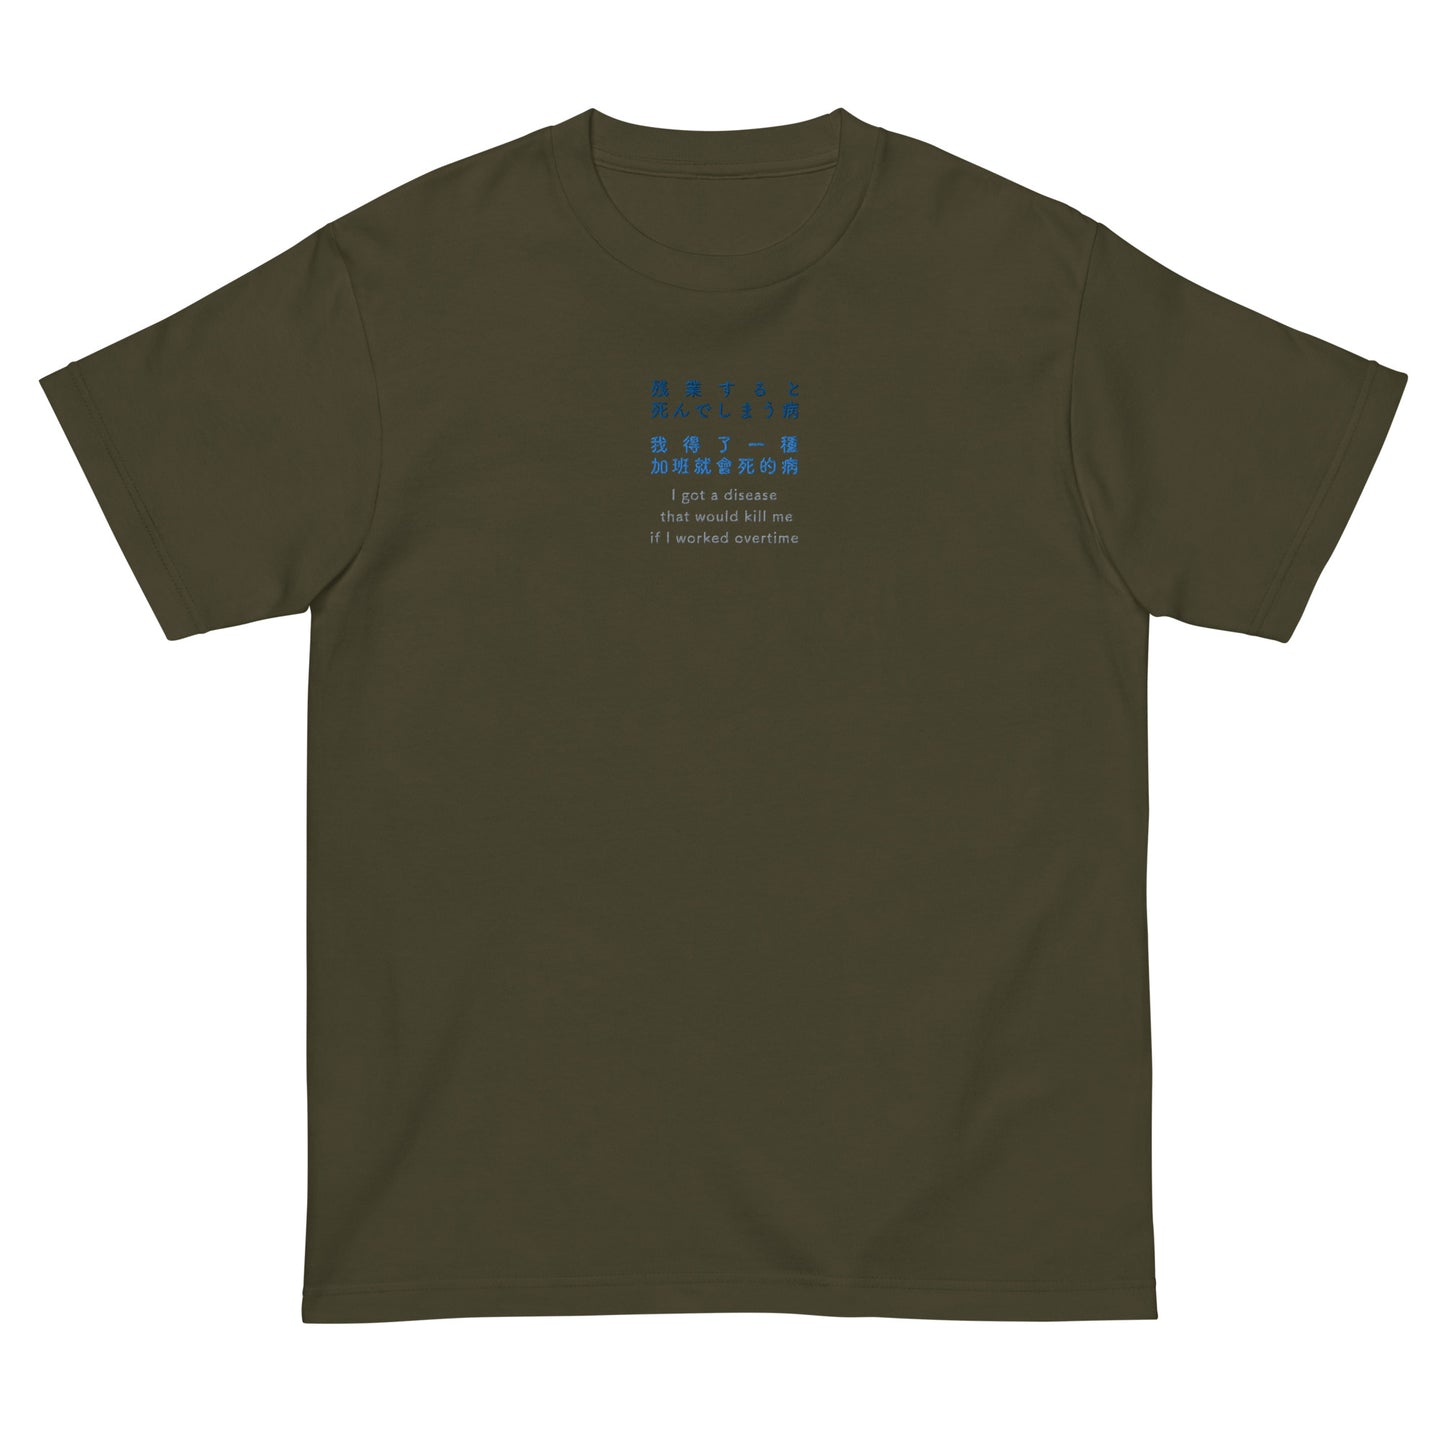 Green High Quality Tee - Front Design with an Navy, Light Blue, Gray Embroidery "i got a disease that would kill me if i worked overtime" in Japanese,Chinese and English